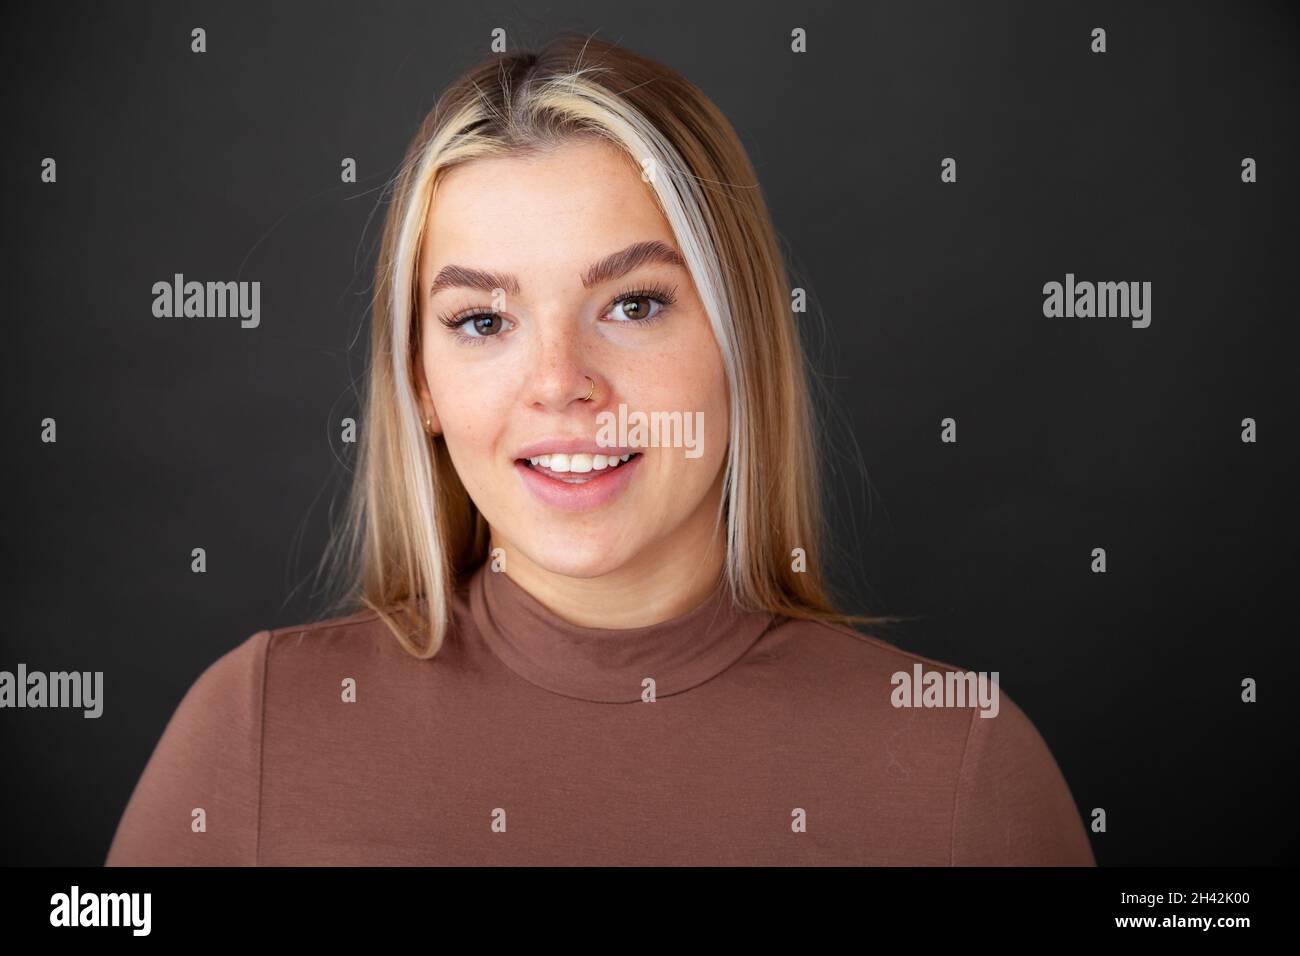 A beautiful young woman giving a toothy smile towards camera Stock Photo